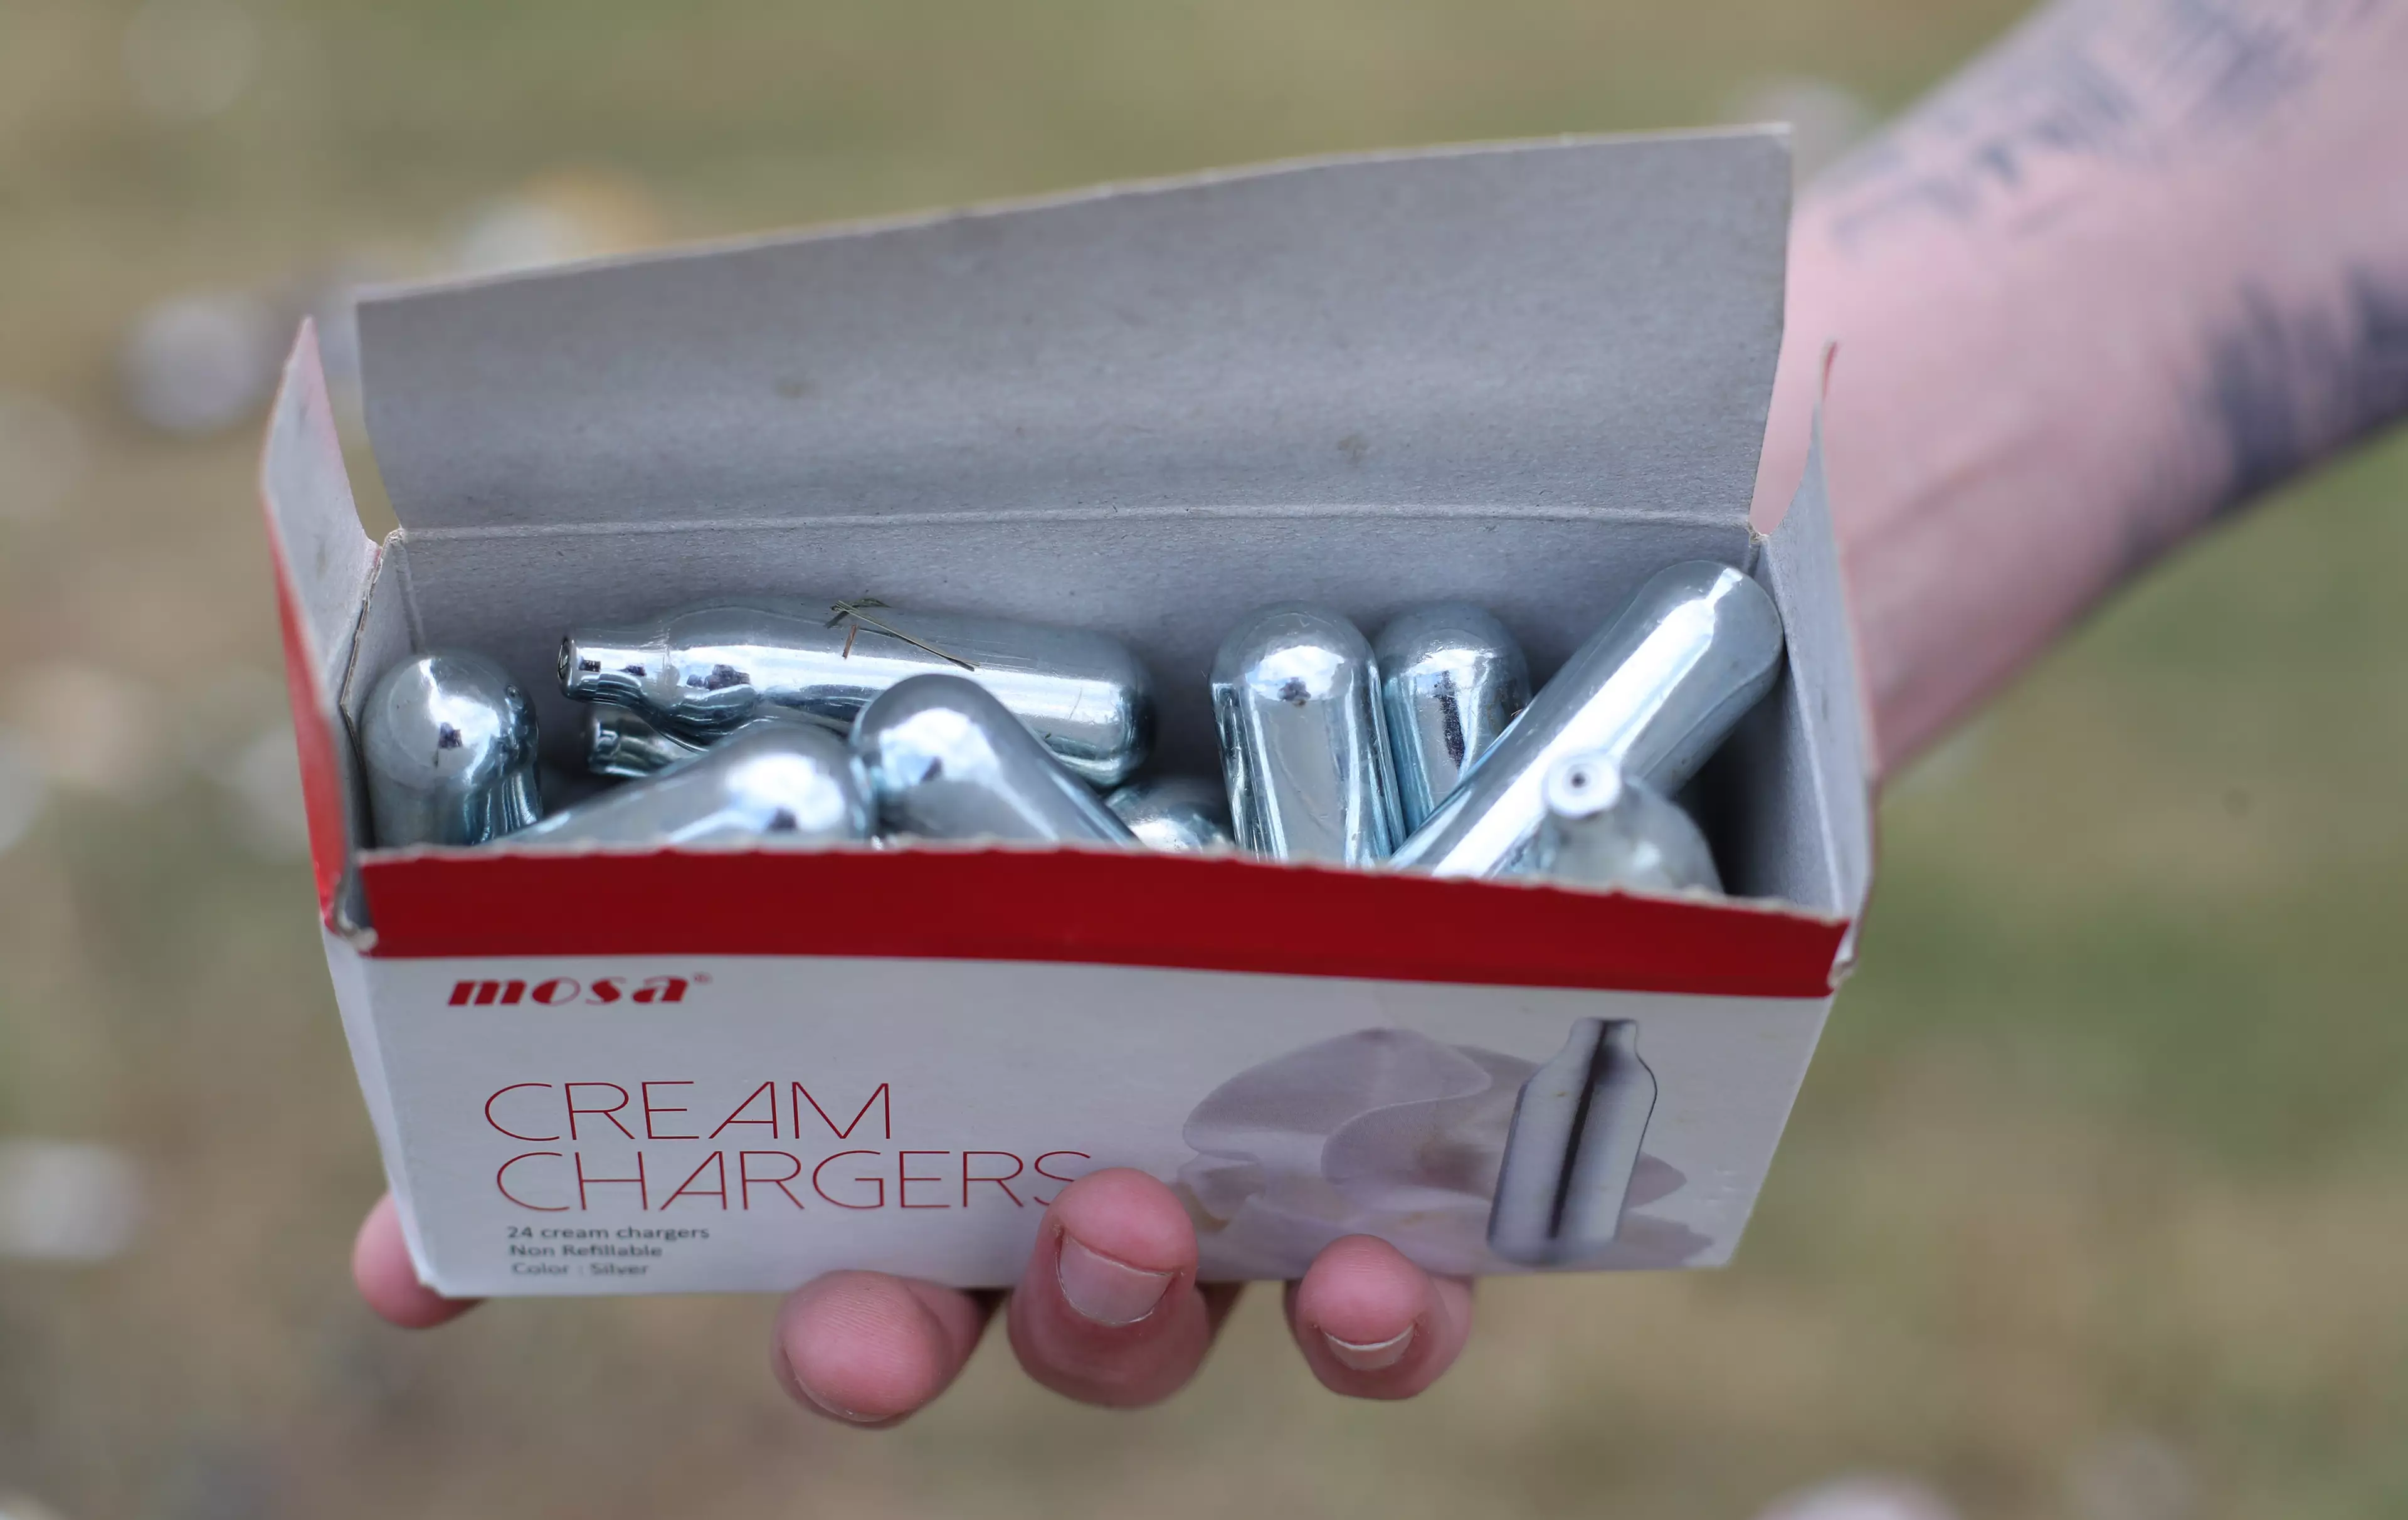 Nitrous oxide canisters.